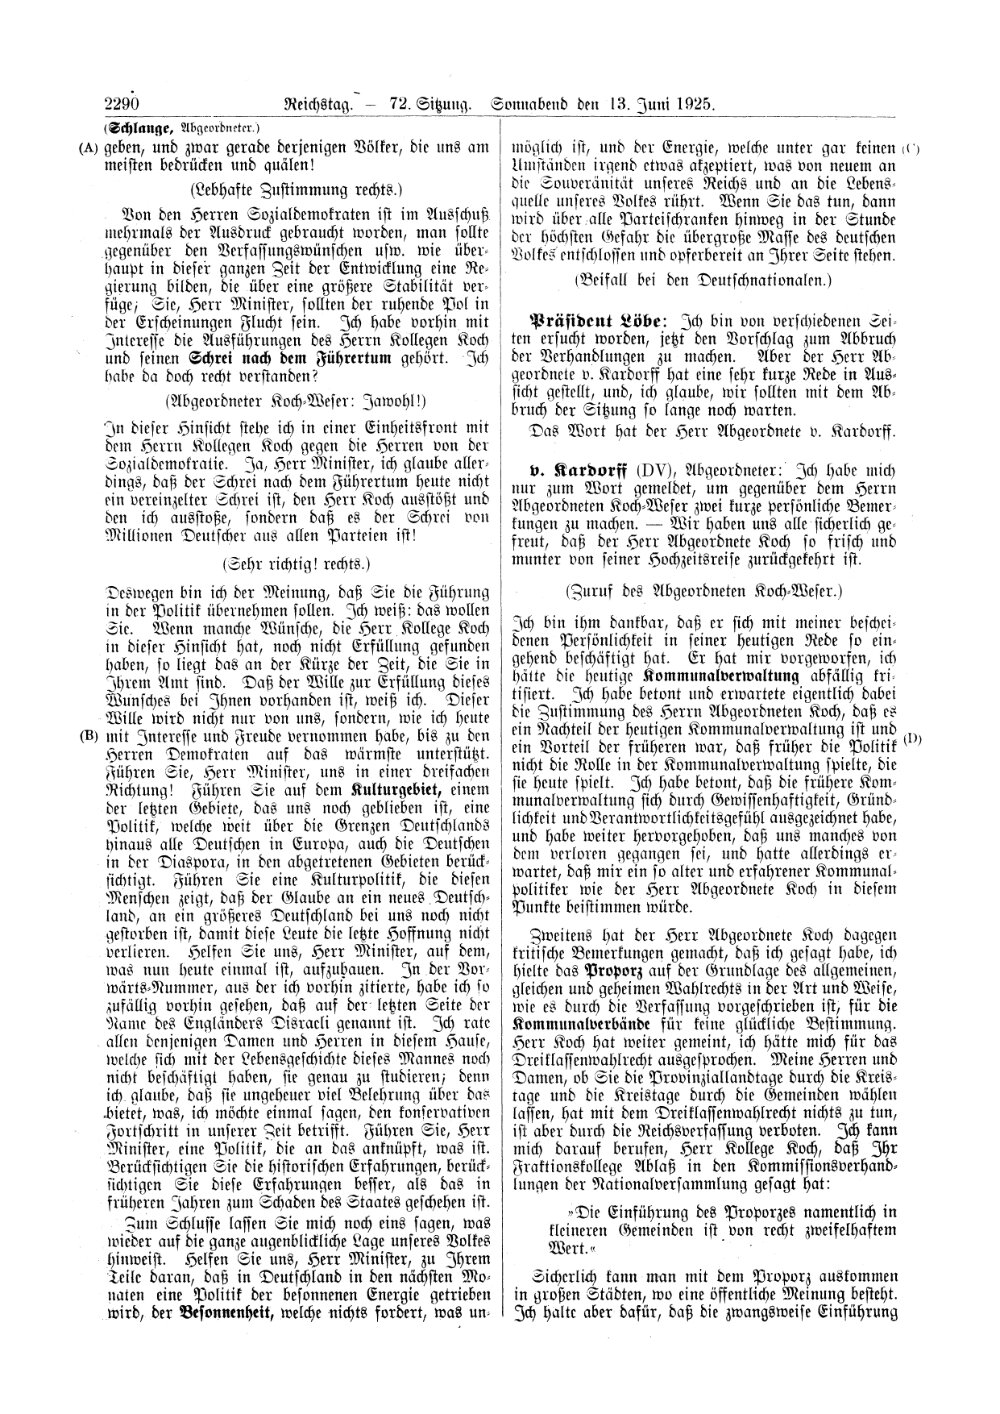 Scan of page 2290